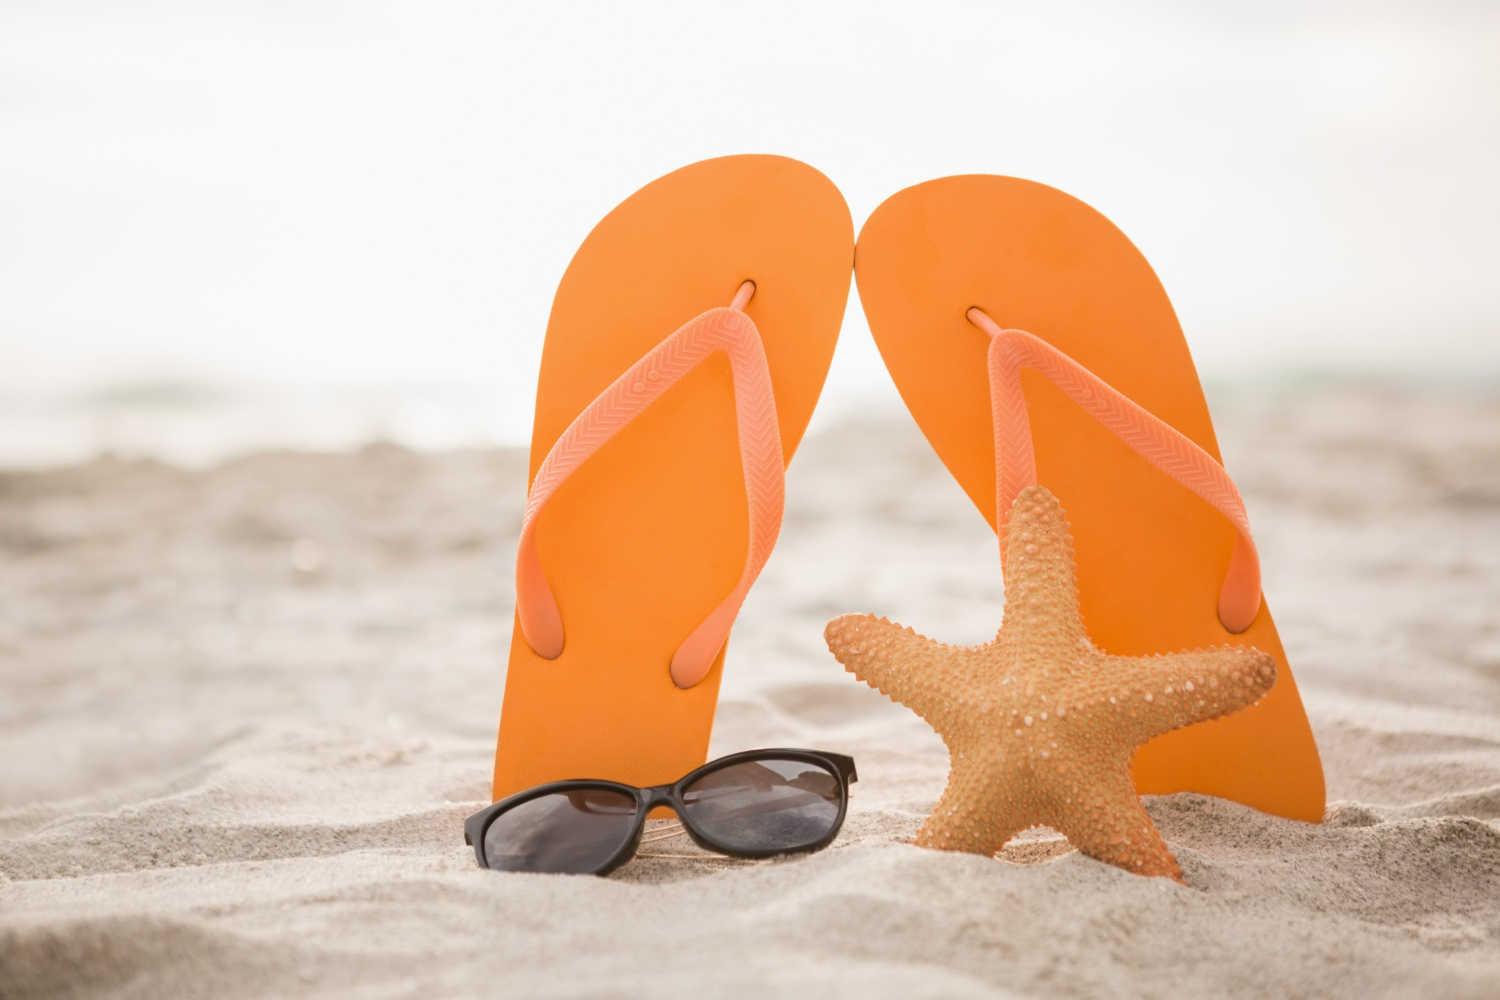 Photo flip flop, sunglasses and starfish in sand. Summer, beach.